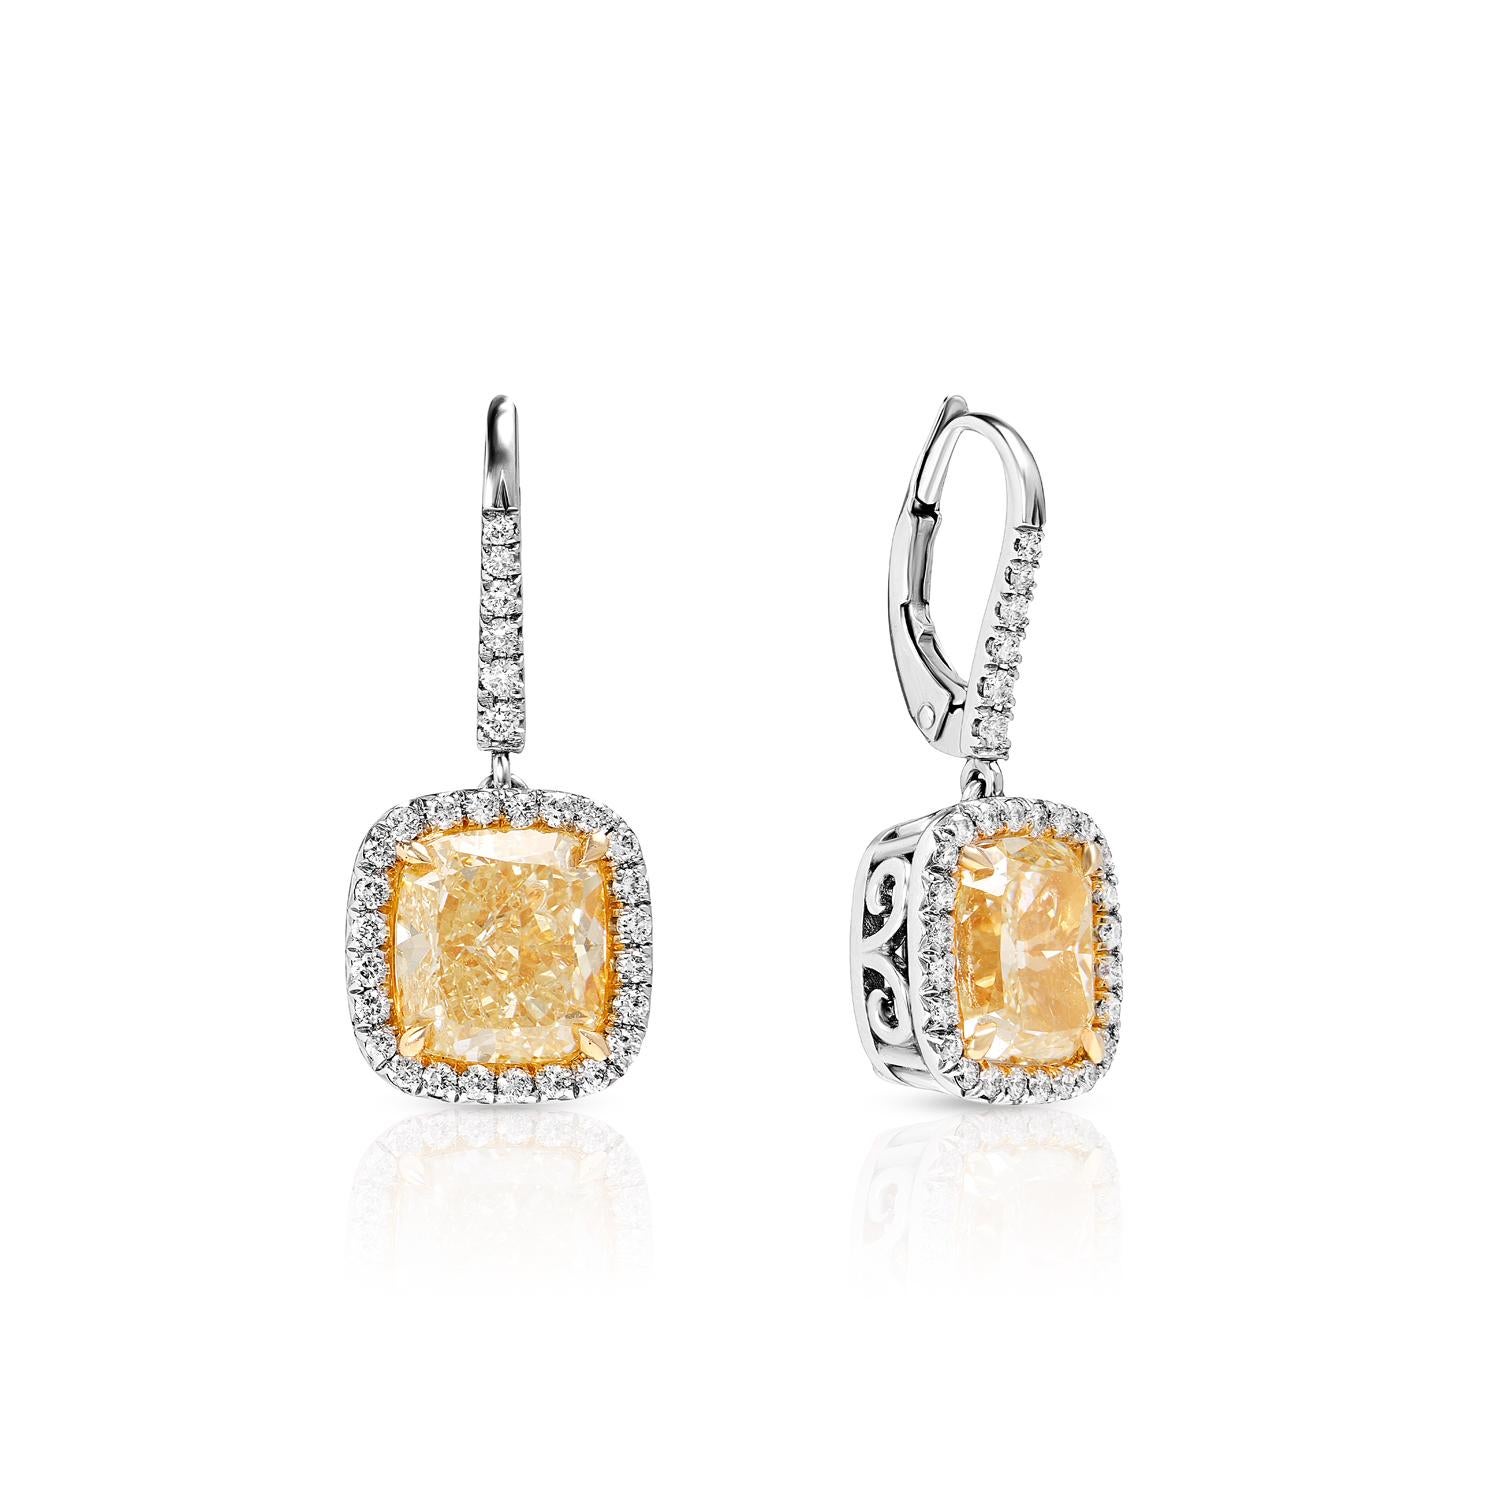 7 Carat Cushion Cut Halo Diamond Leverback Earrings Certified Y In New Condition For Sale In New York, NY